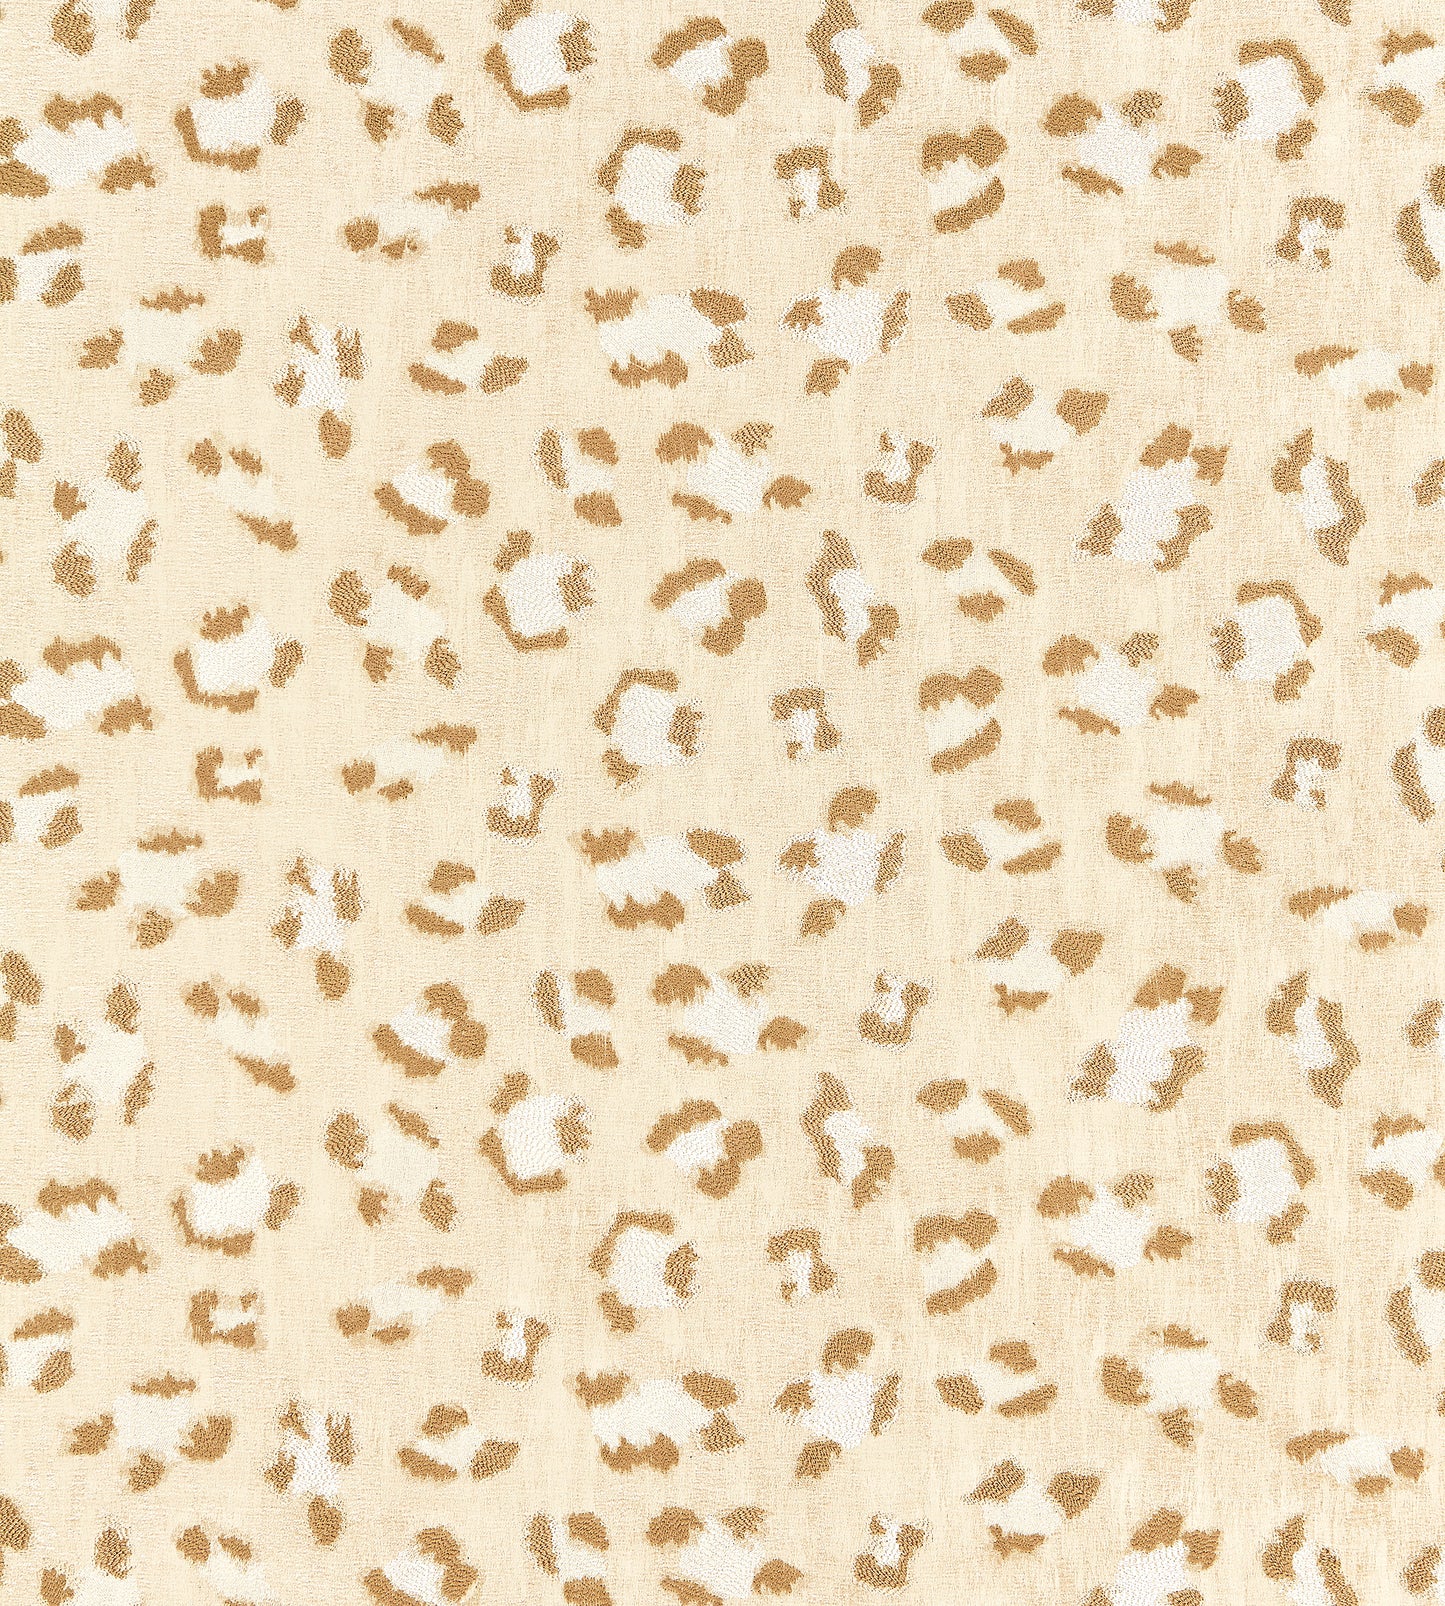 Purchase Scalamandre Fabric Item SC 000127075, Broderie Leopard Camel On Cream 1